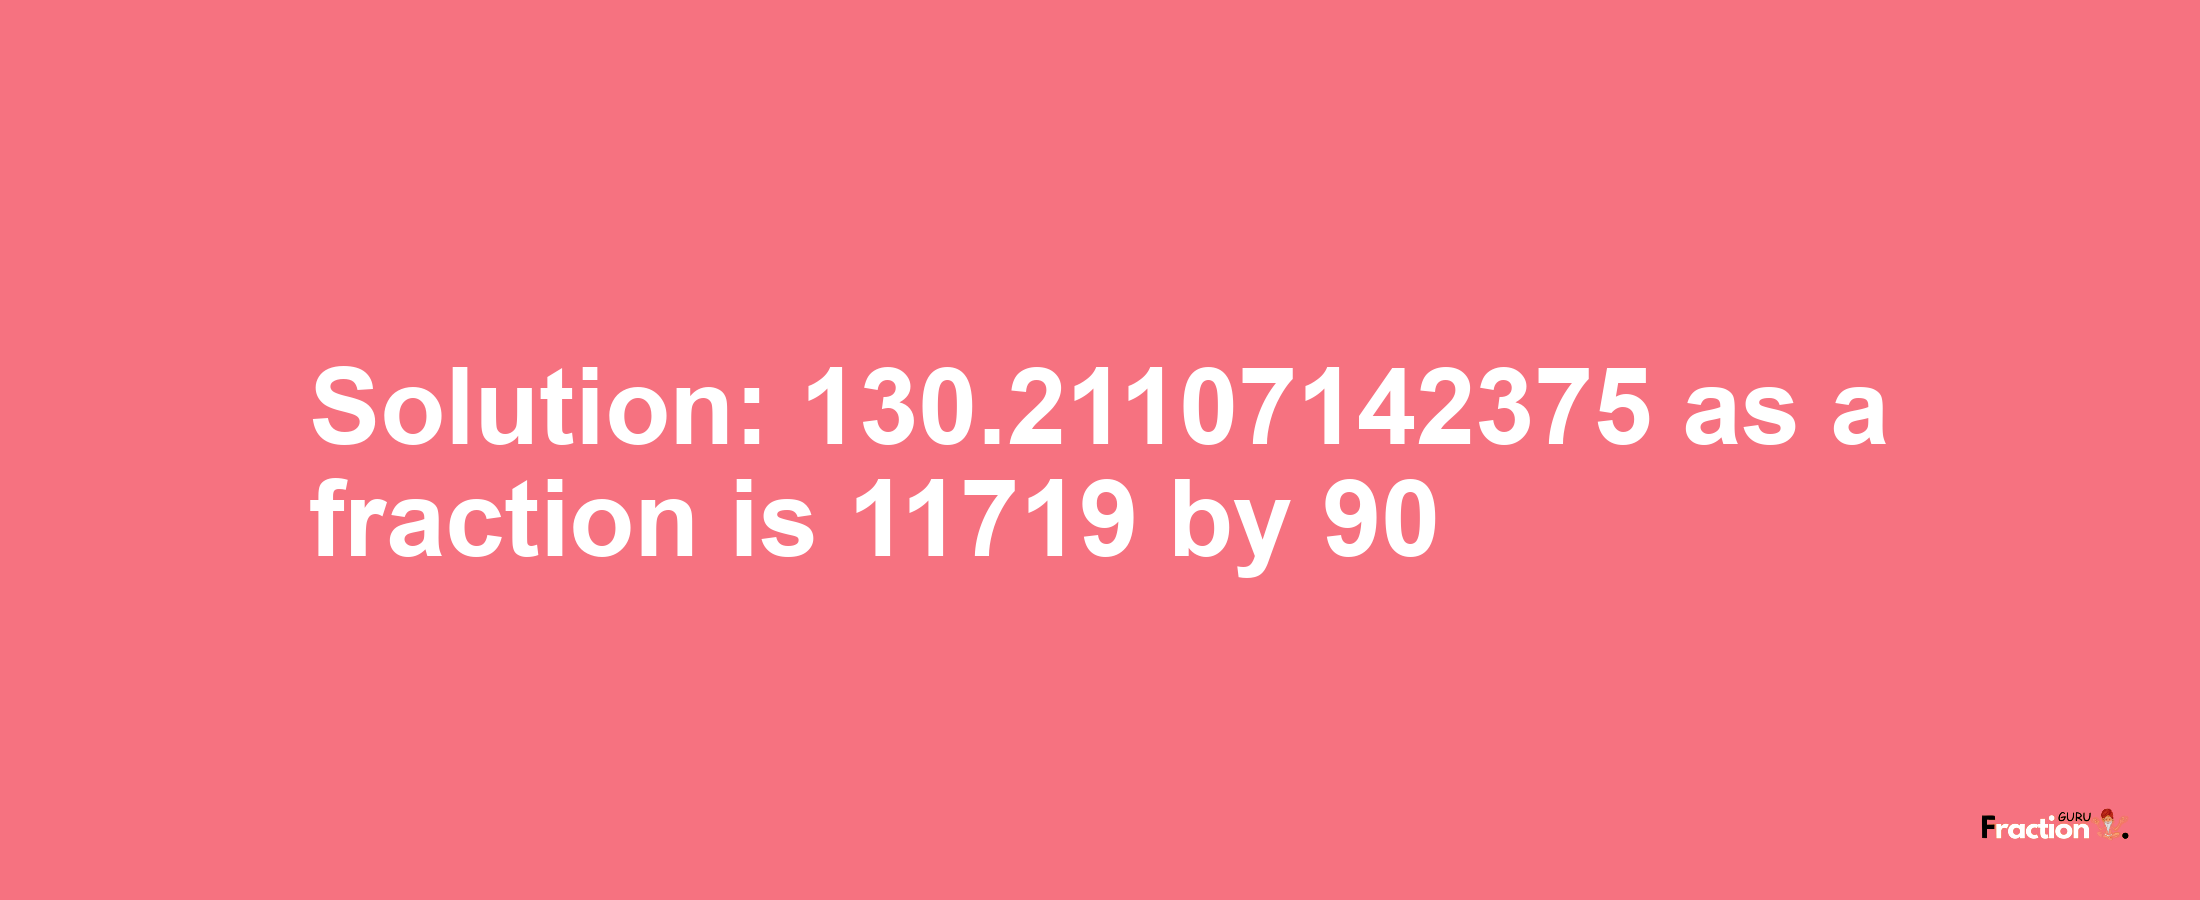 Solution:130.21107142375 as a fraction is 11719/90